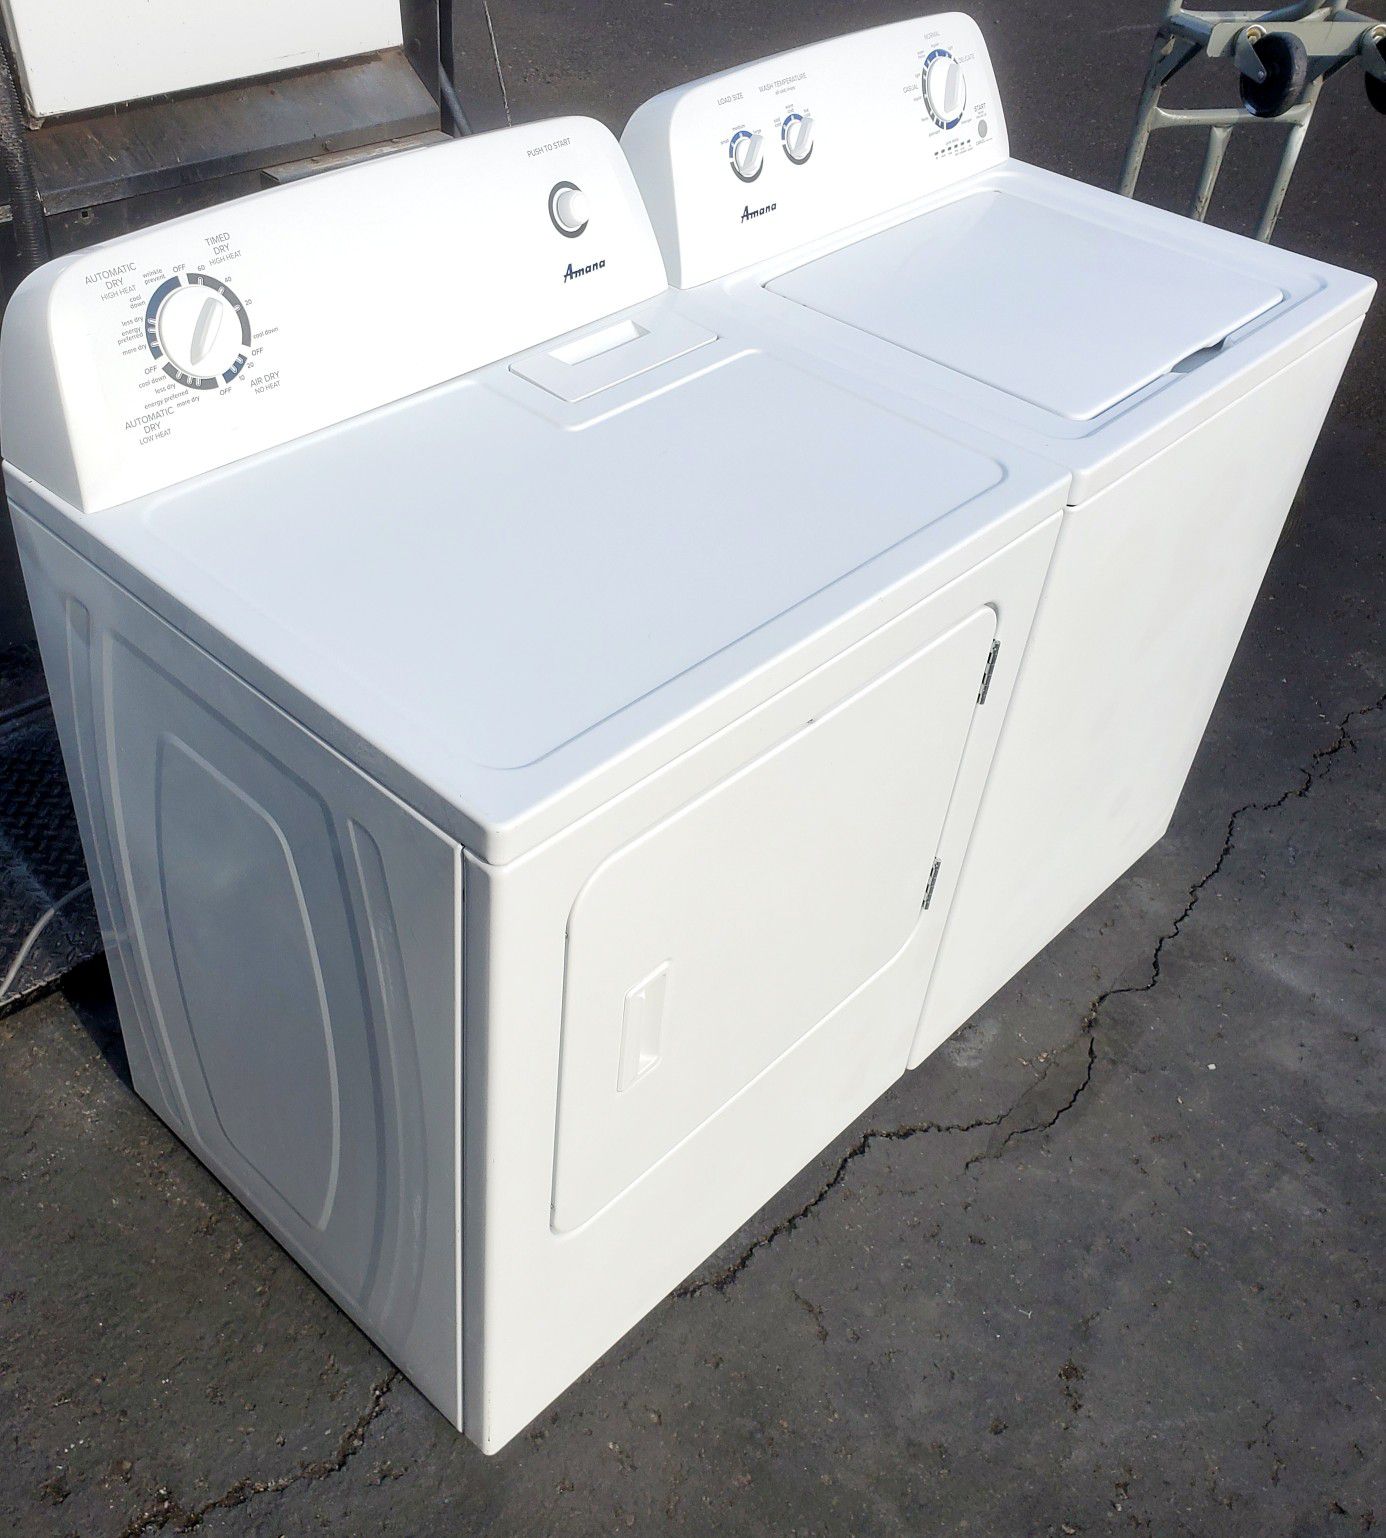 AMANA WASHER AND DRYER SET( ELECTRIC )